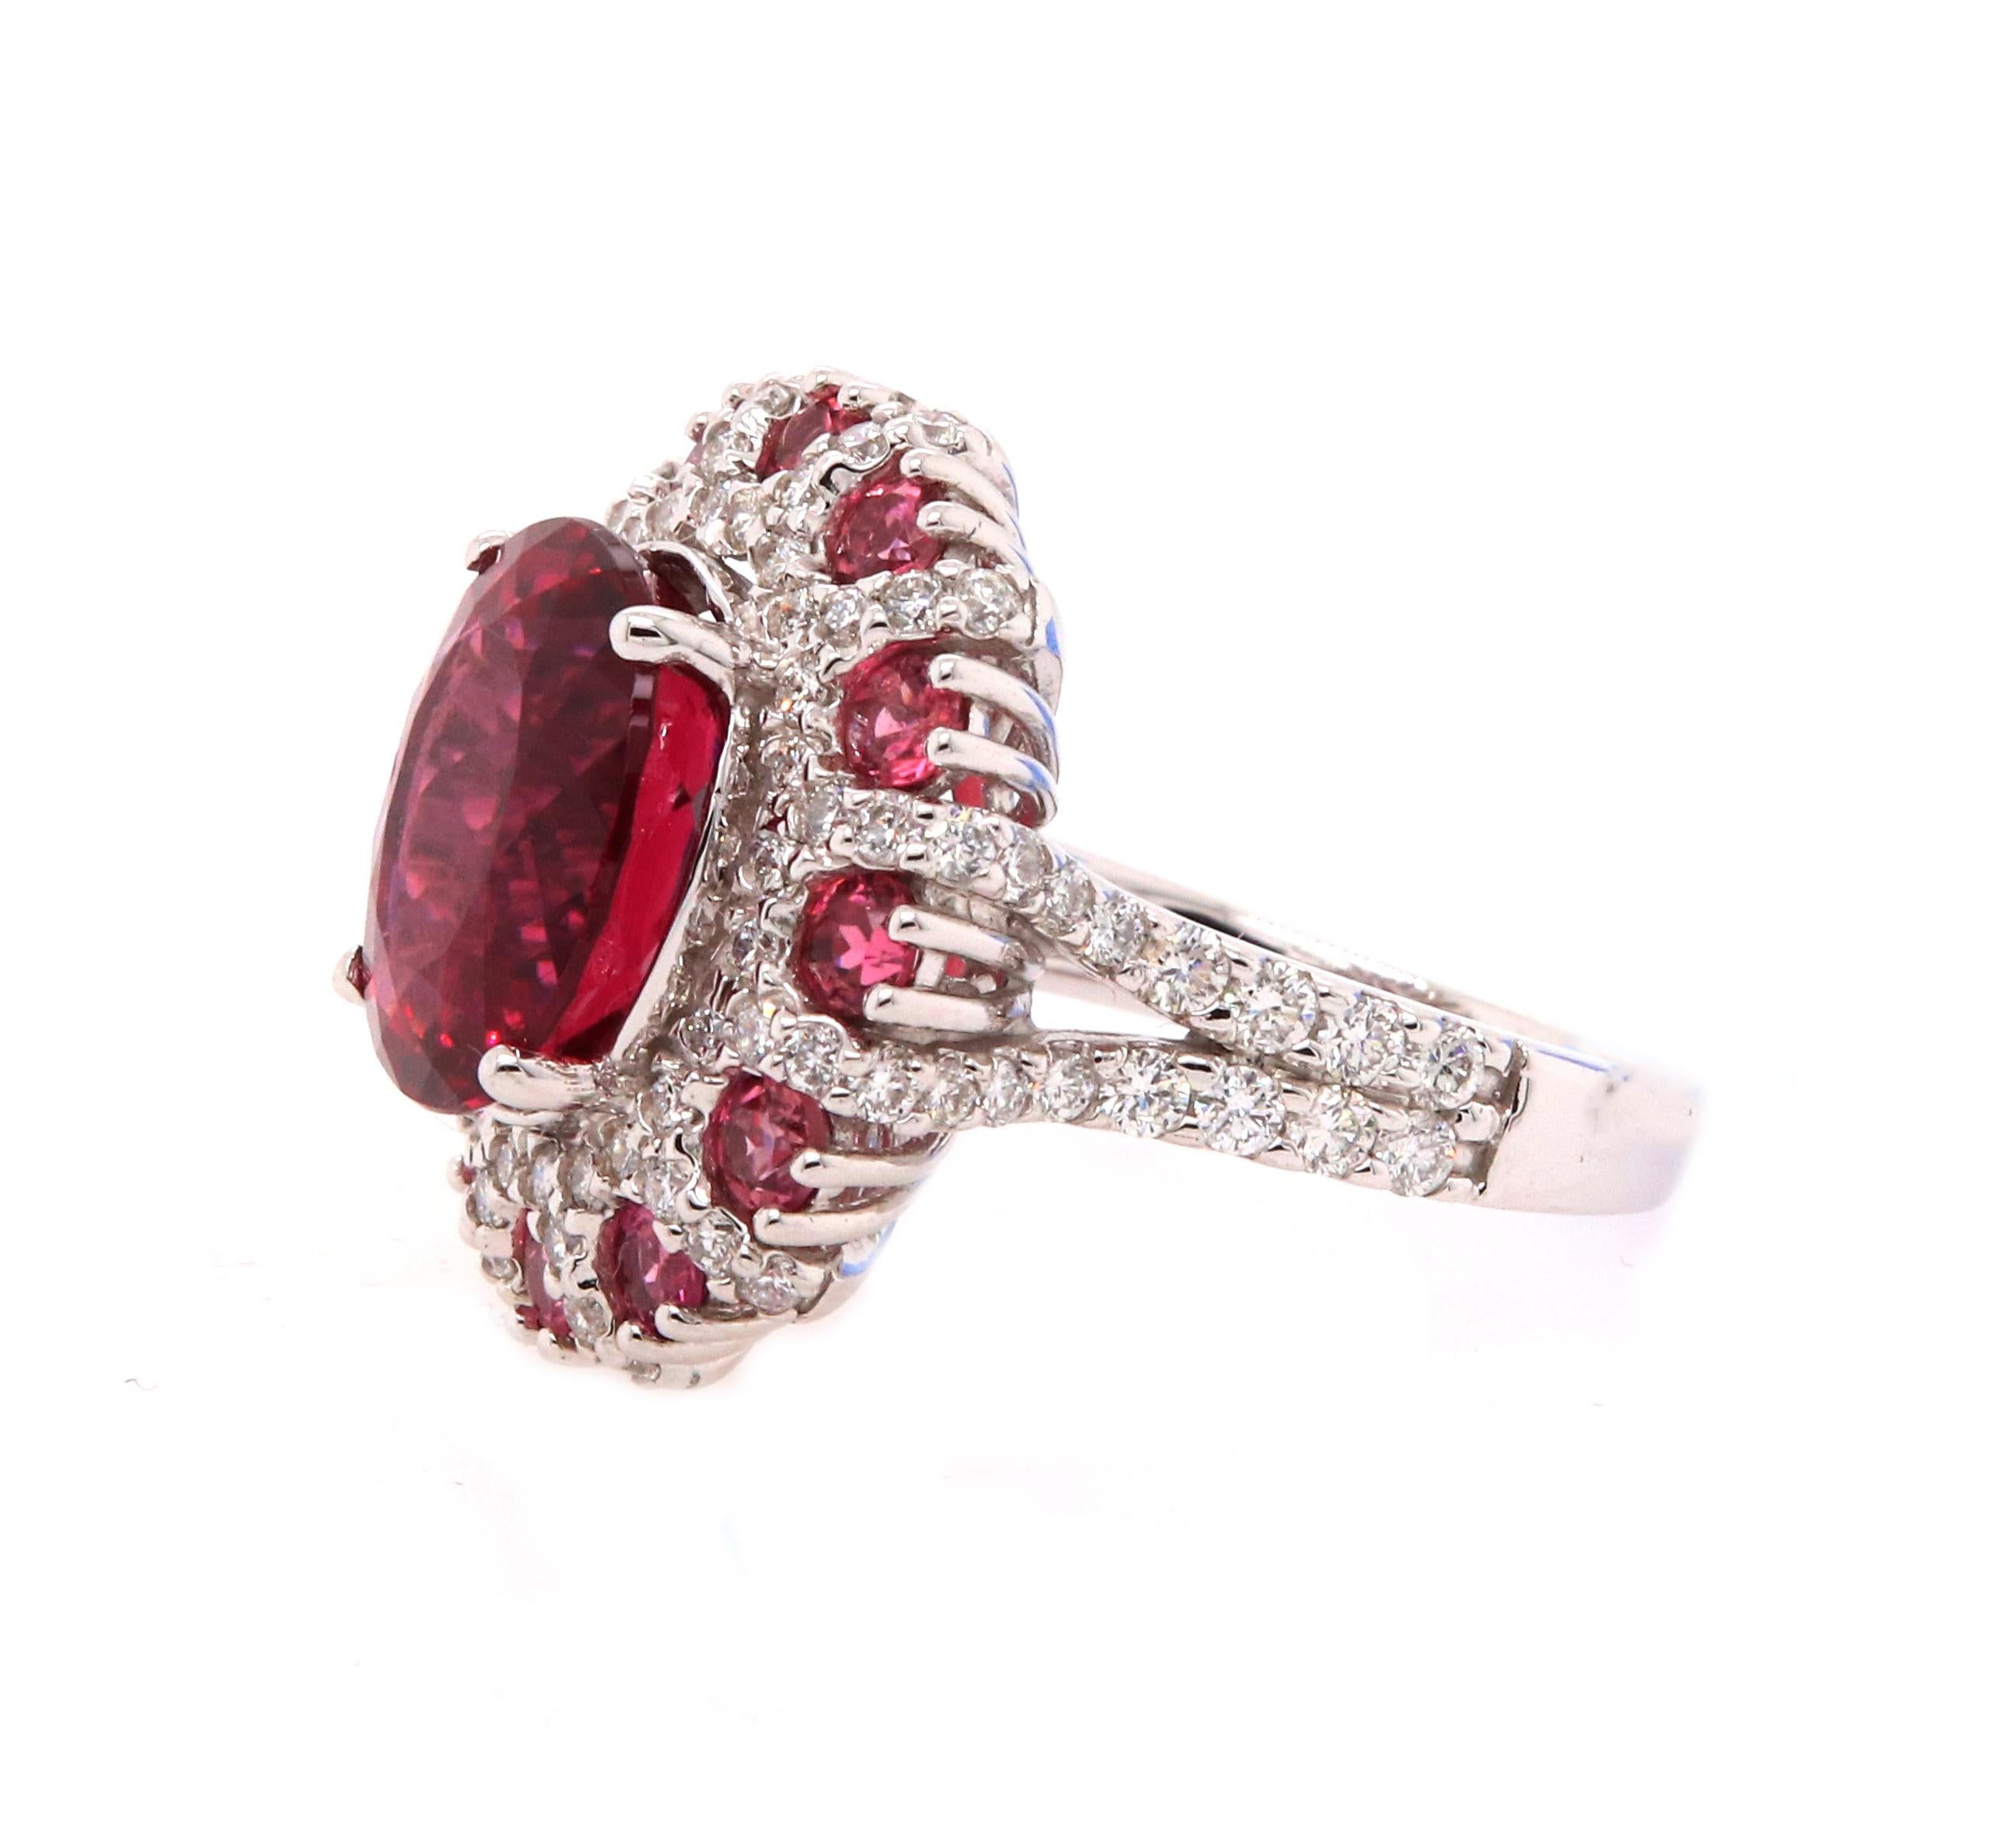 Contemporary 5.57 Carat Oval Rubellite, Pink Tourmaline and Diamond Ring